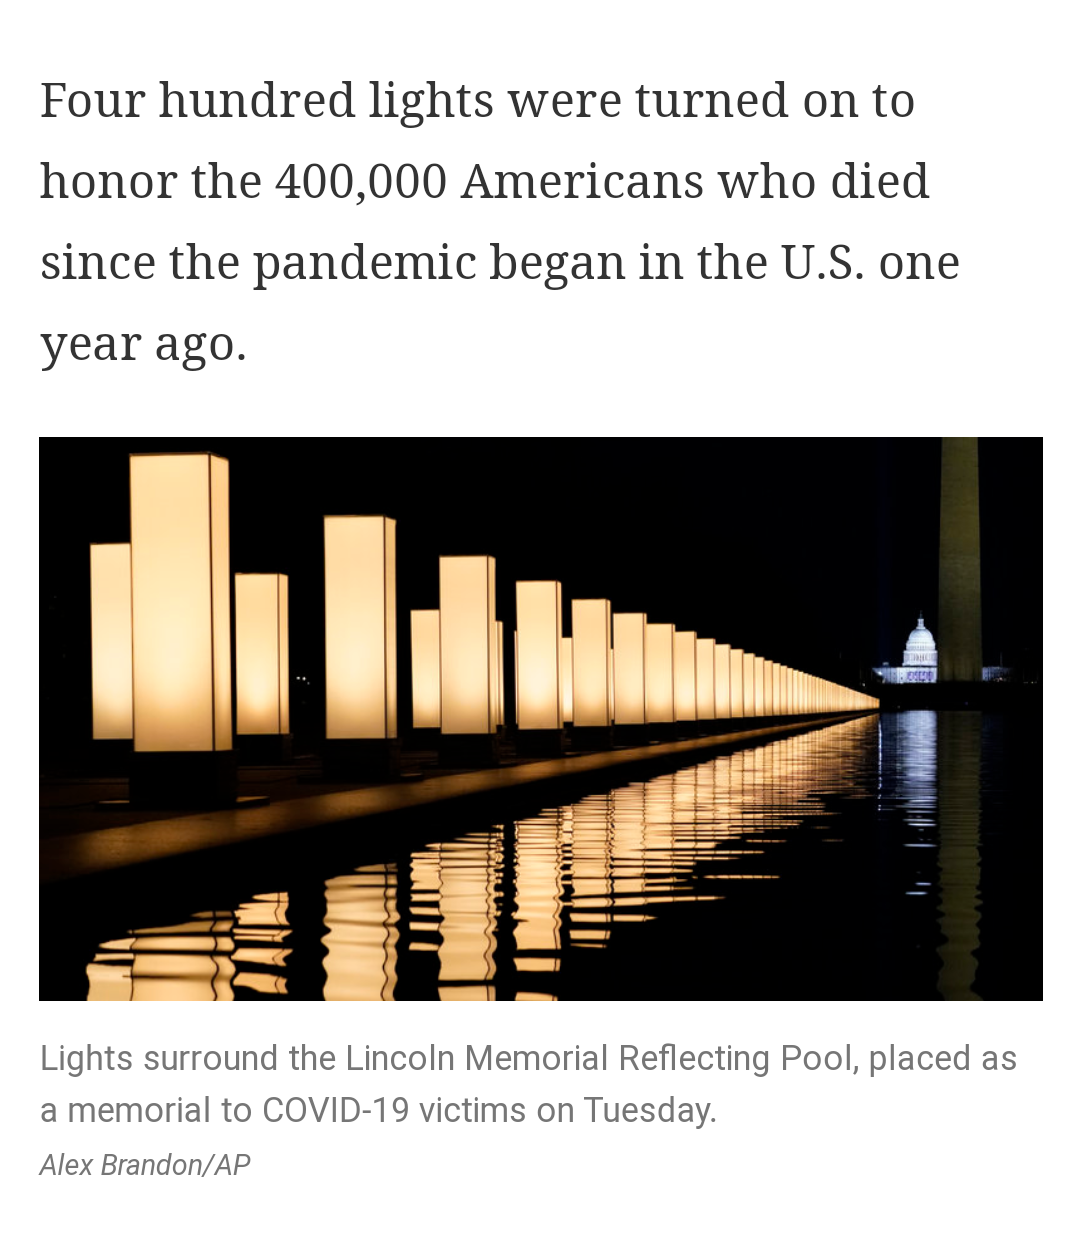 random pics - heat - Four hundred lights were turned on to honor the 400,000 Americans who died since the pandemic began in the U.S. one year ago. Lights surround the Lincoln Memorial Reflecting Pool, placed as a memorial to Covid19 victims on Tuesday. Al